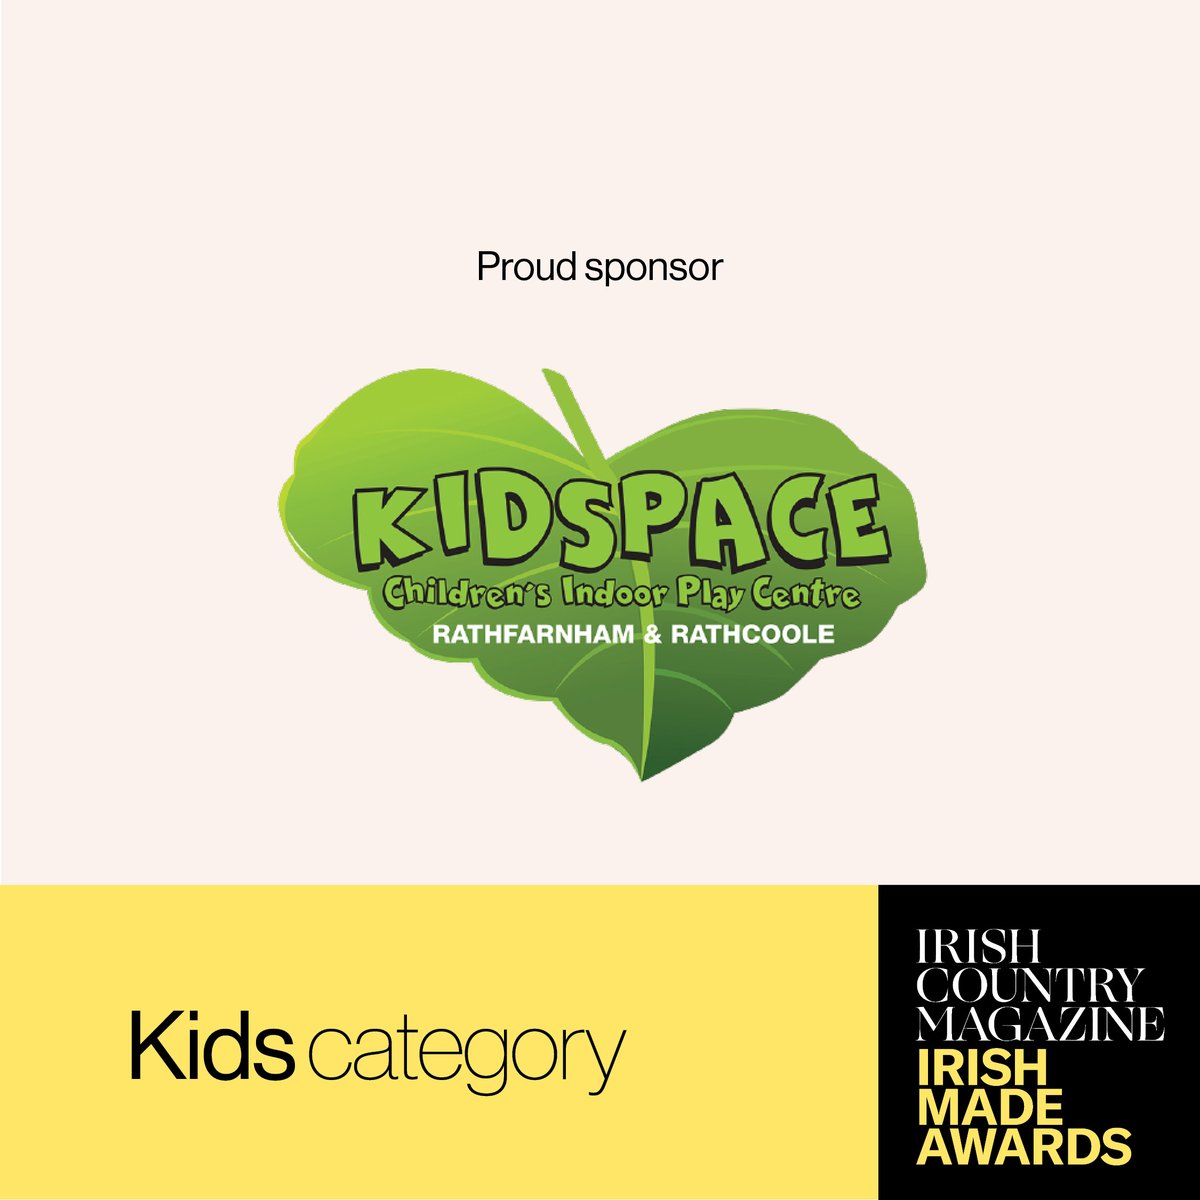 We are thrilled to announce @KidSpaceDublin as the sponsor of the Kids category in the #IrishMadeAwards2024

eu1.hubs.ly/H08W9wx0

#irishmade #kidspace #kidscategory #sp #ima2024